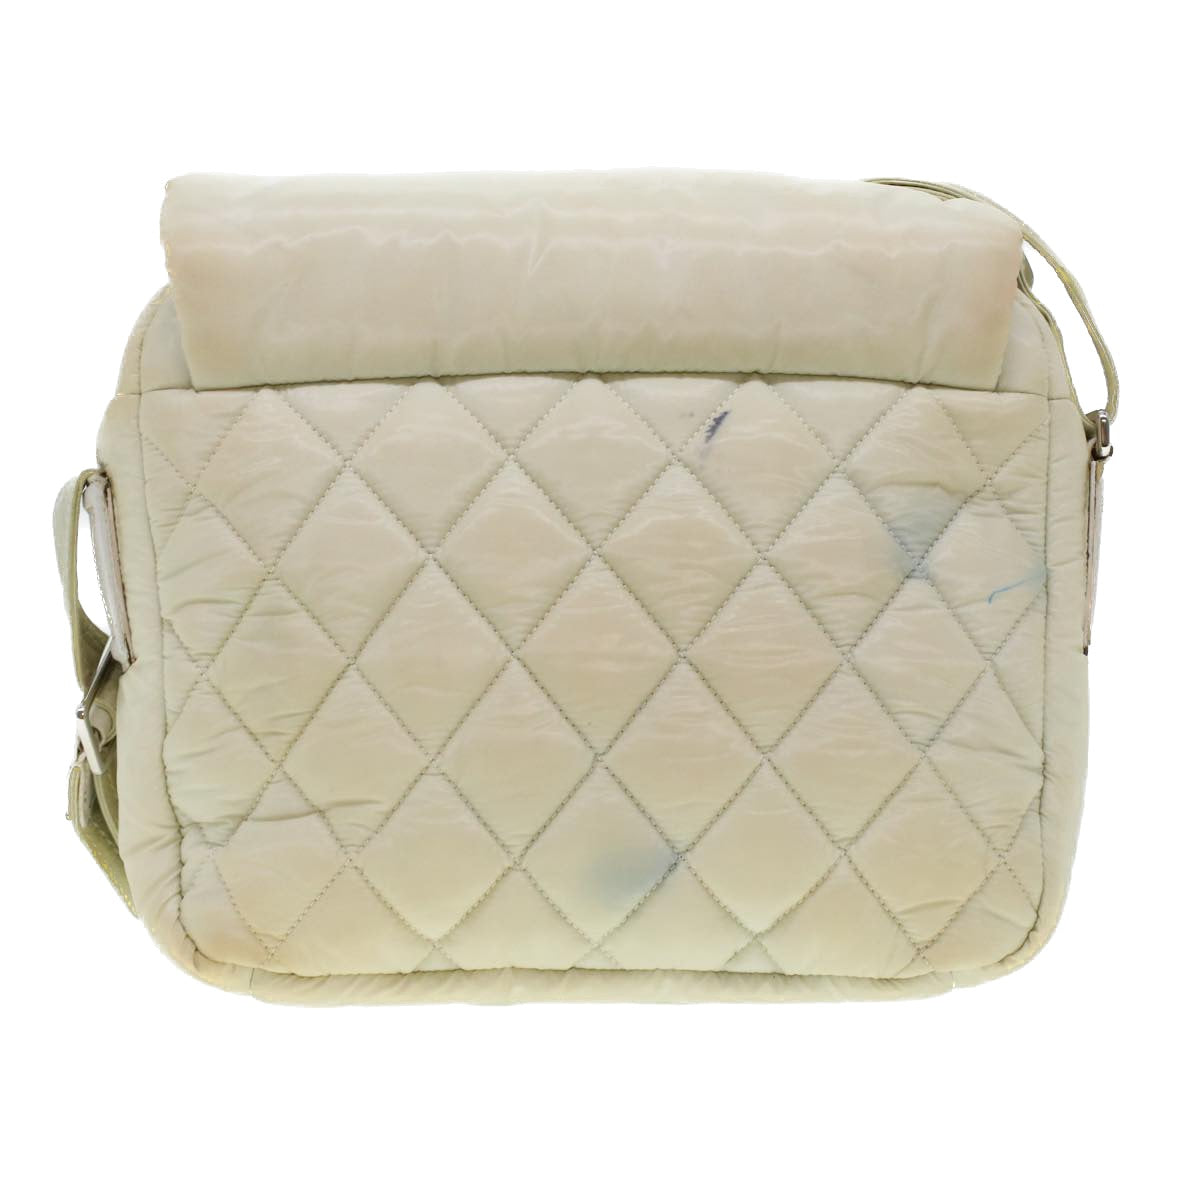 CHANEL Matelasse Shoulder Bag Patent leather White CC Auth bs5109 - 0